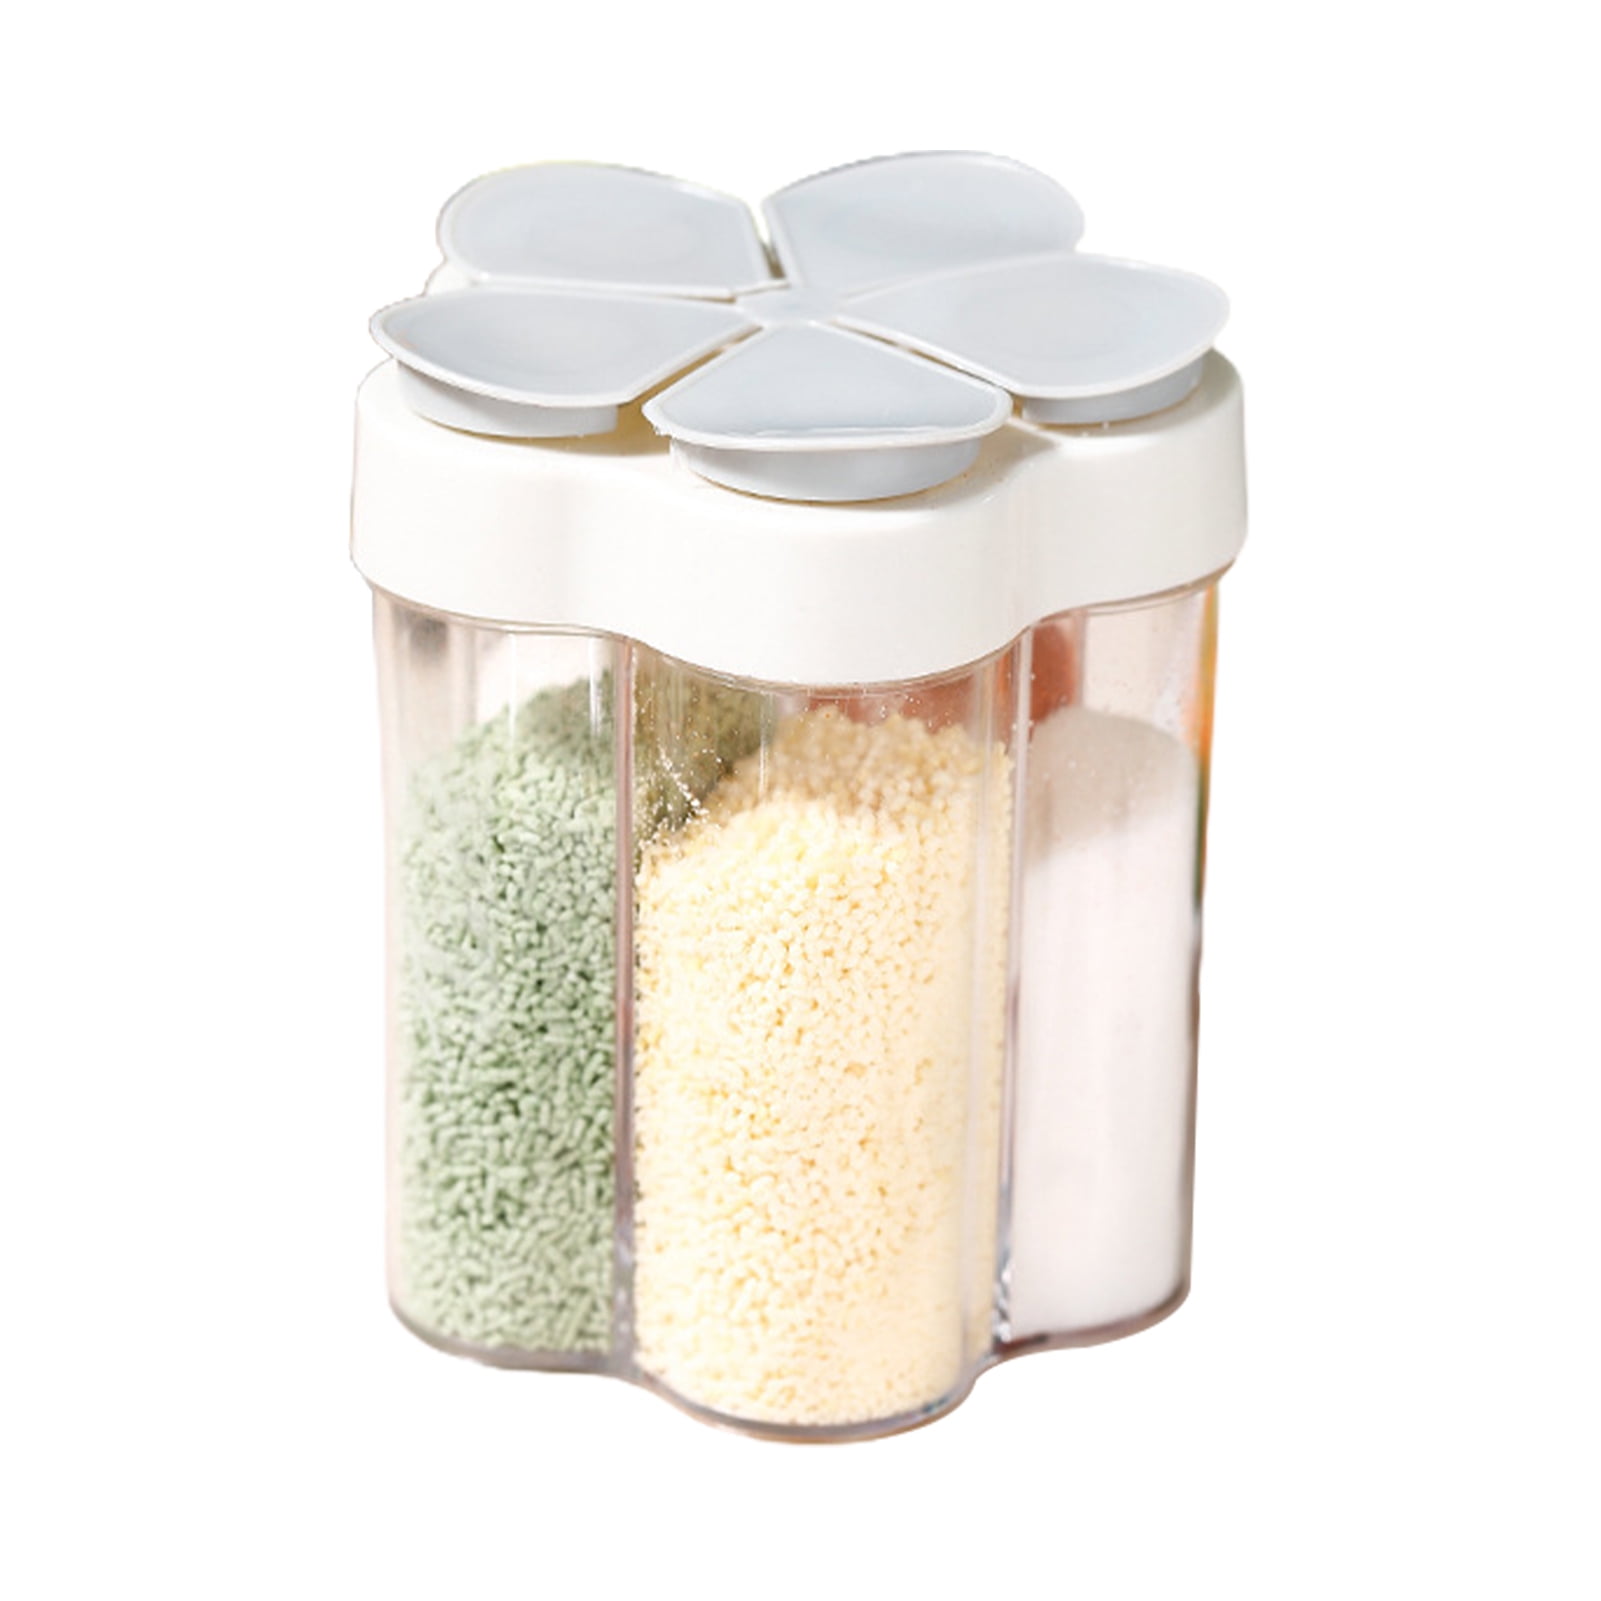 About 4g/1 Spoonful Per Portion, Seasoning Jar, Glass Seasoning Container  With Lid And Spoon, Salt & Pepper Shaker, Creative Monosodium Glutamate  Pot, Kitchen Spice Organizer